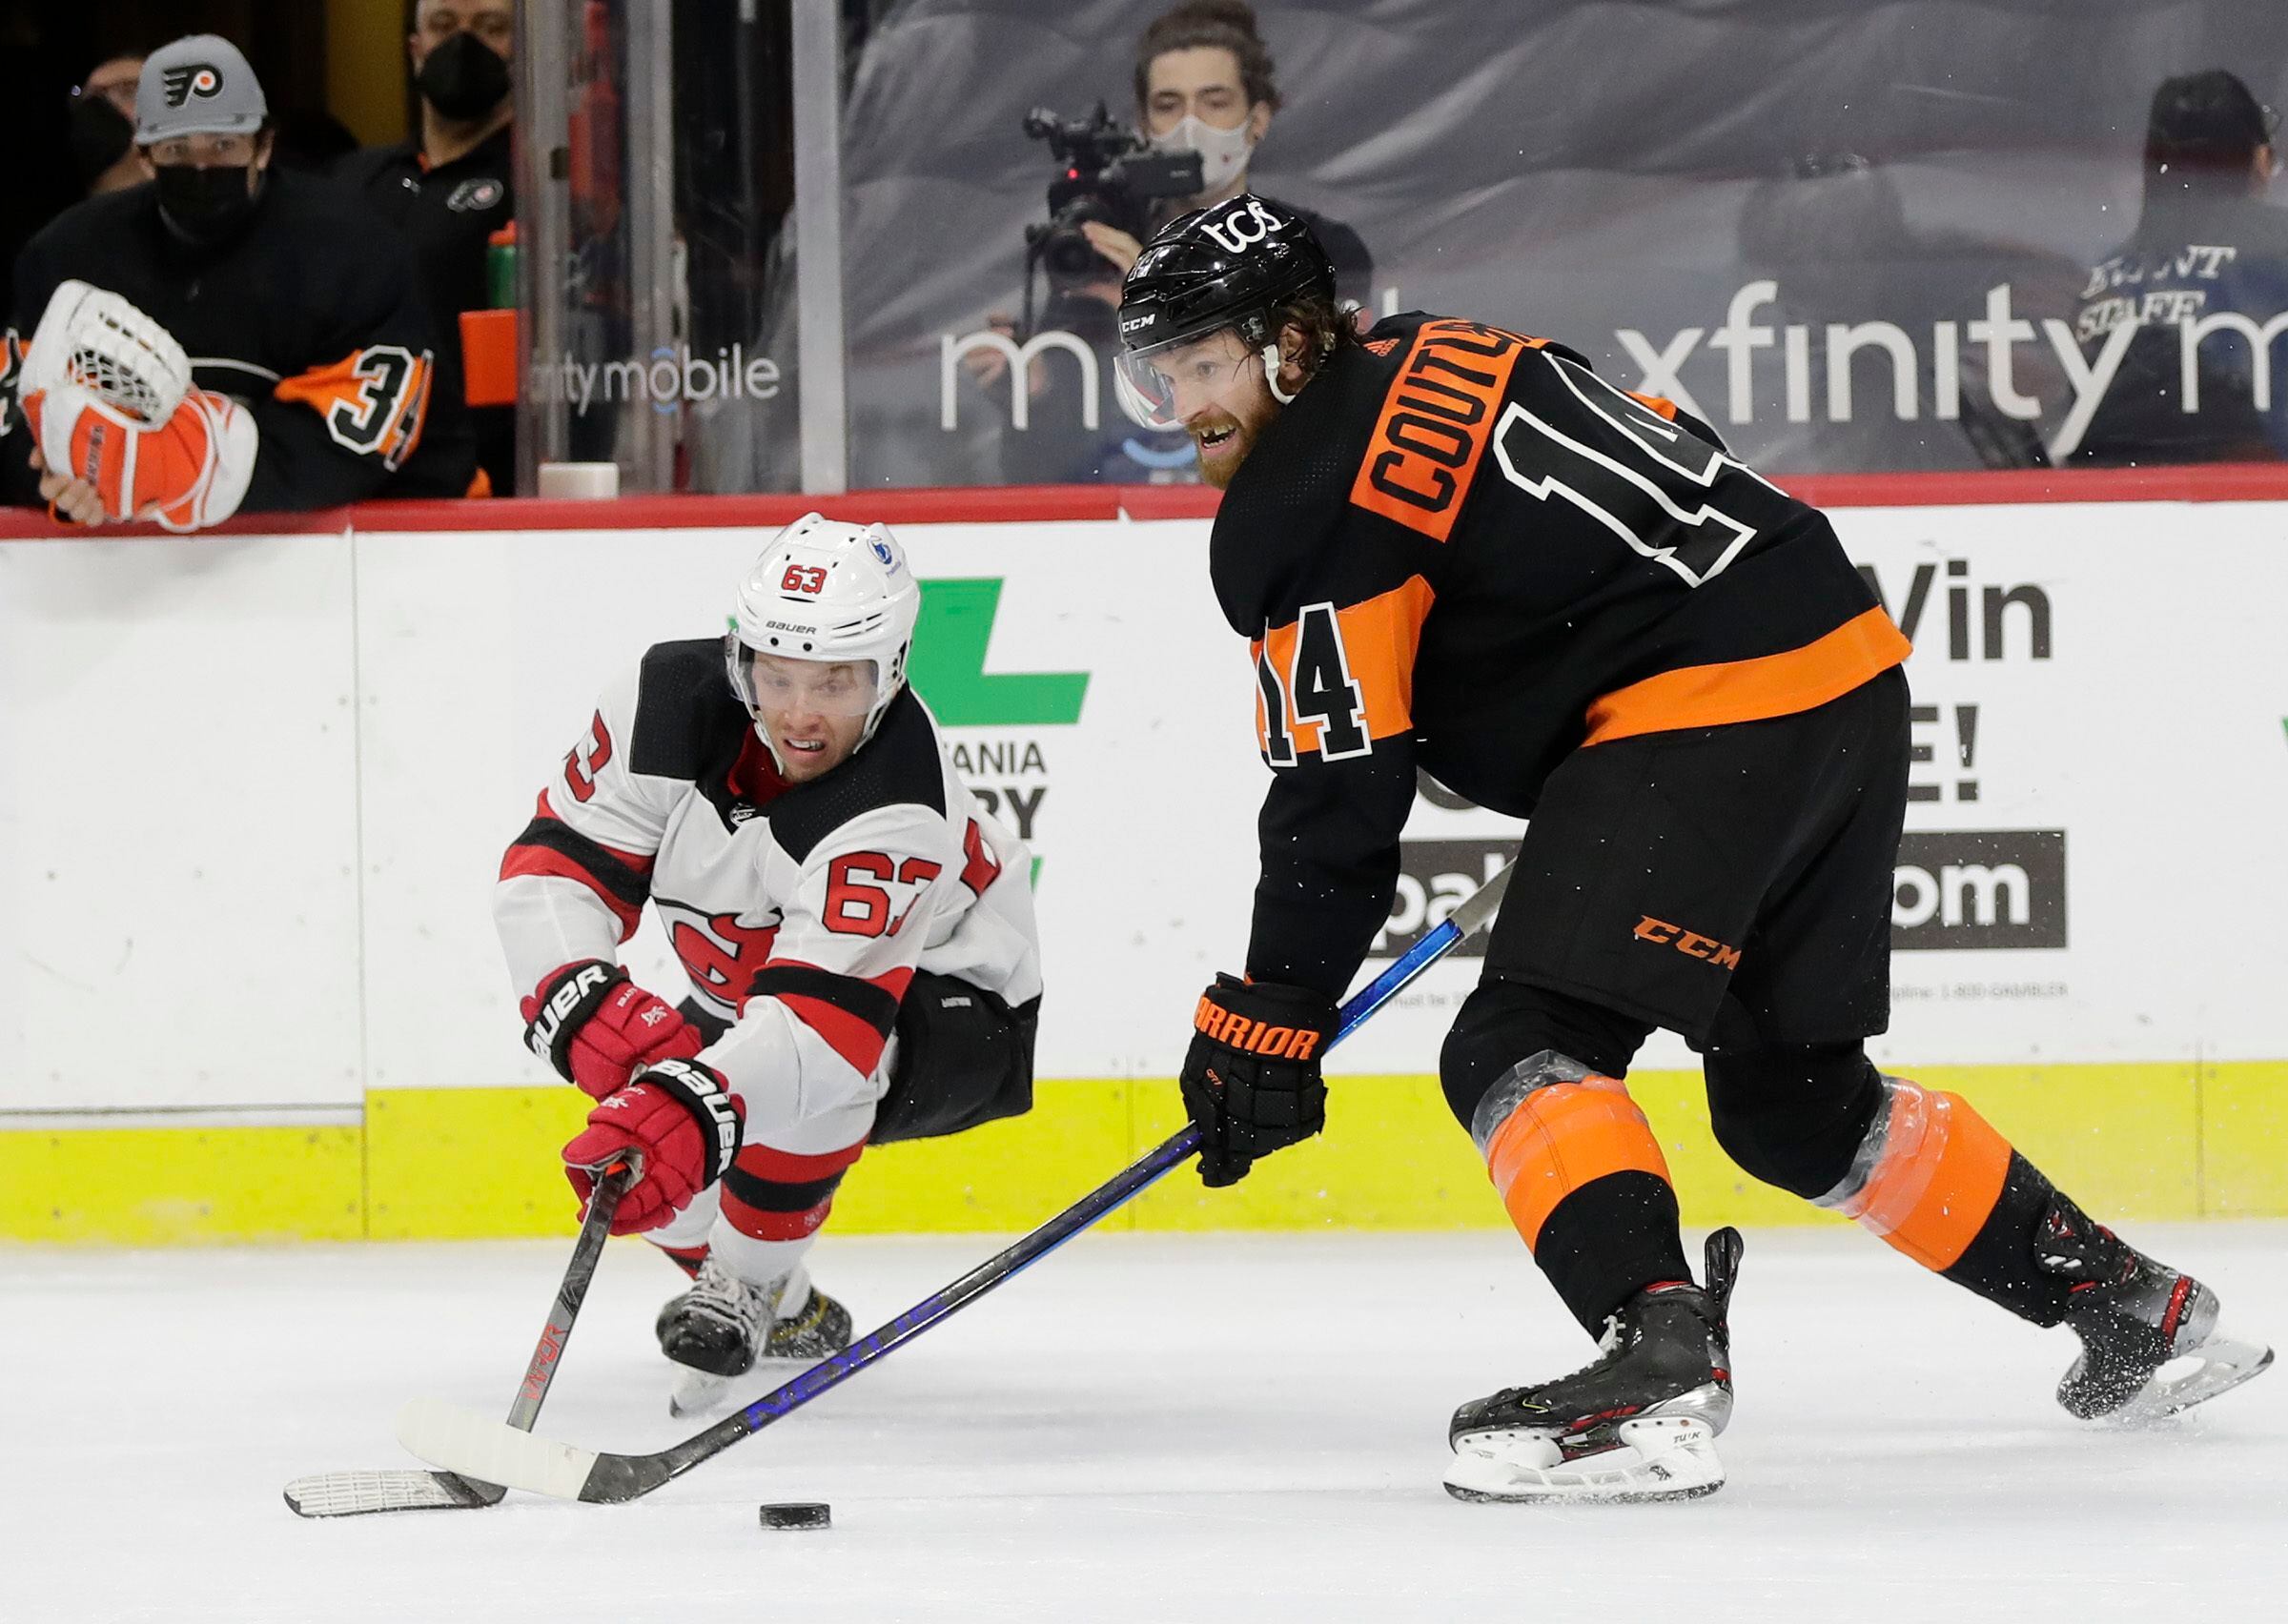 Flyers' Morgan Frost Signs Contract Extension